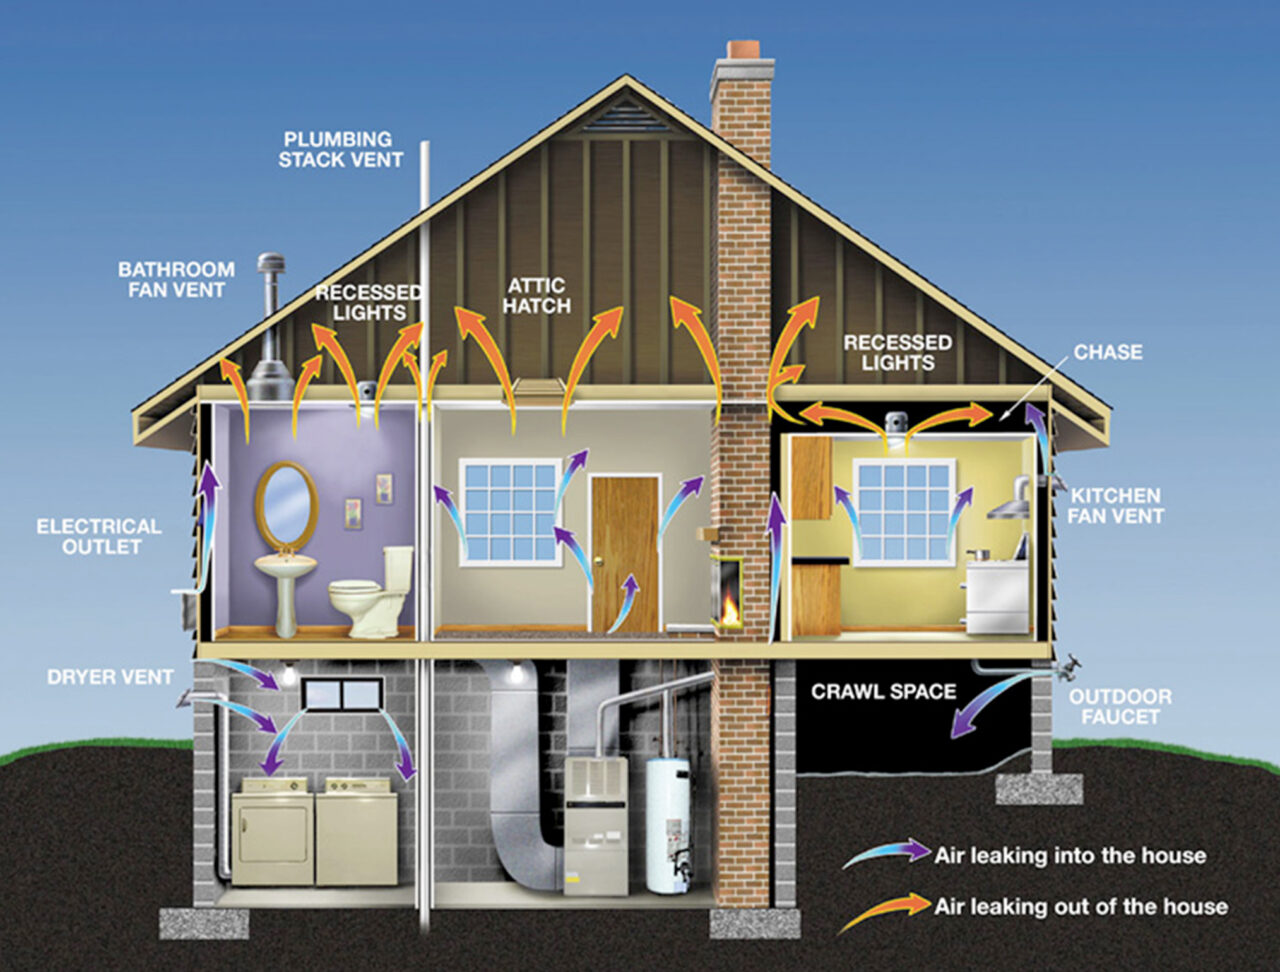 Air tightness and moisture control - Why is it important?